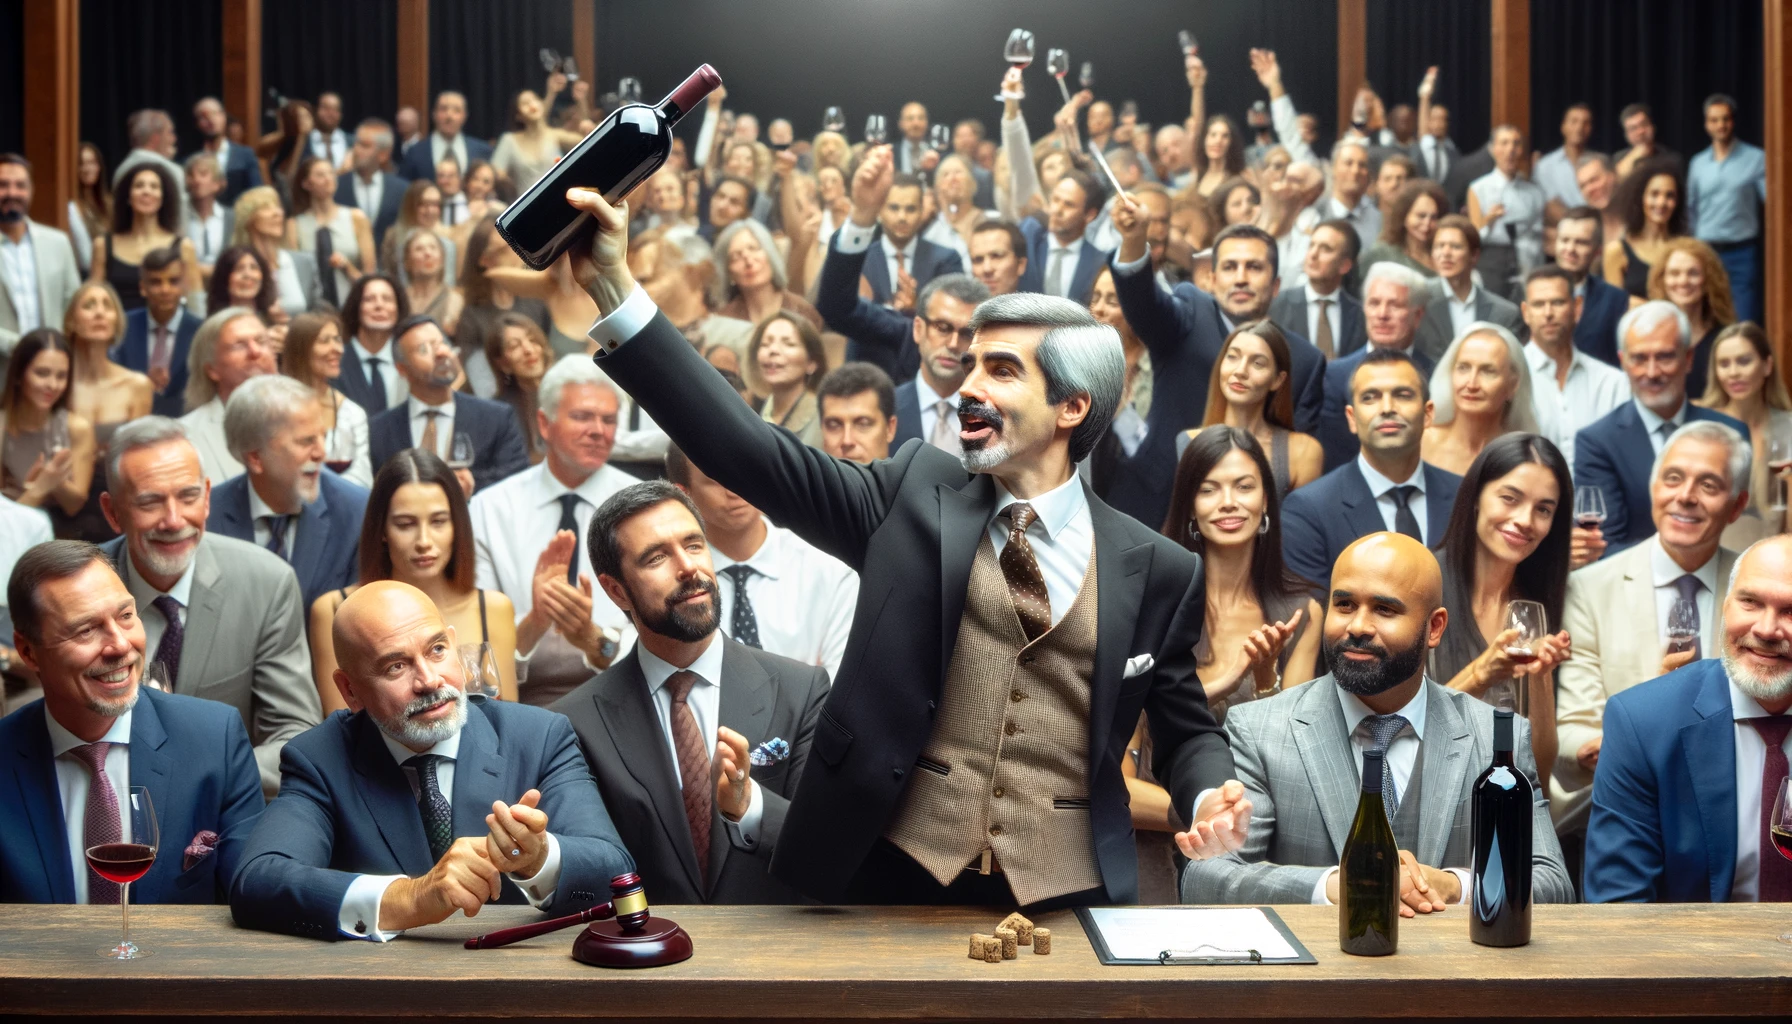 Selling Options: Auctions, Private Sales, or Wine Brokers